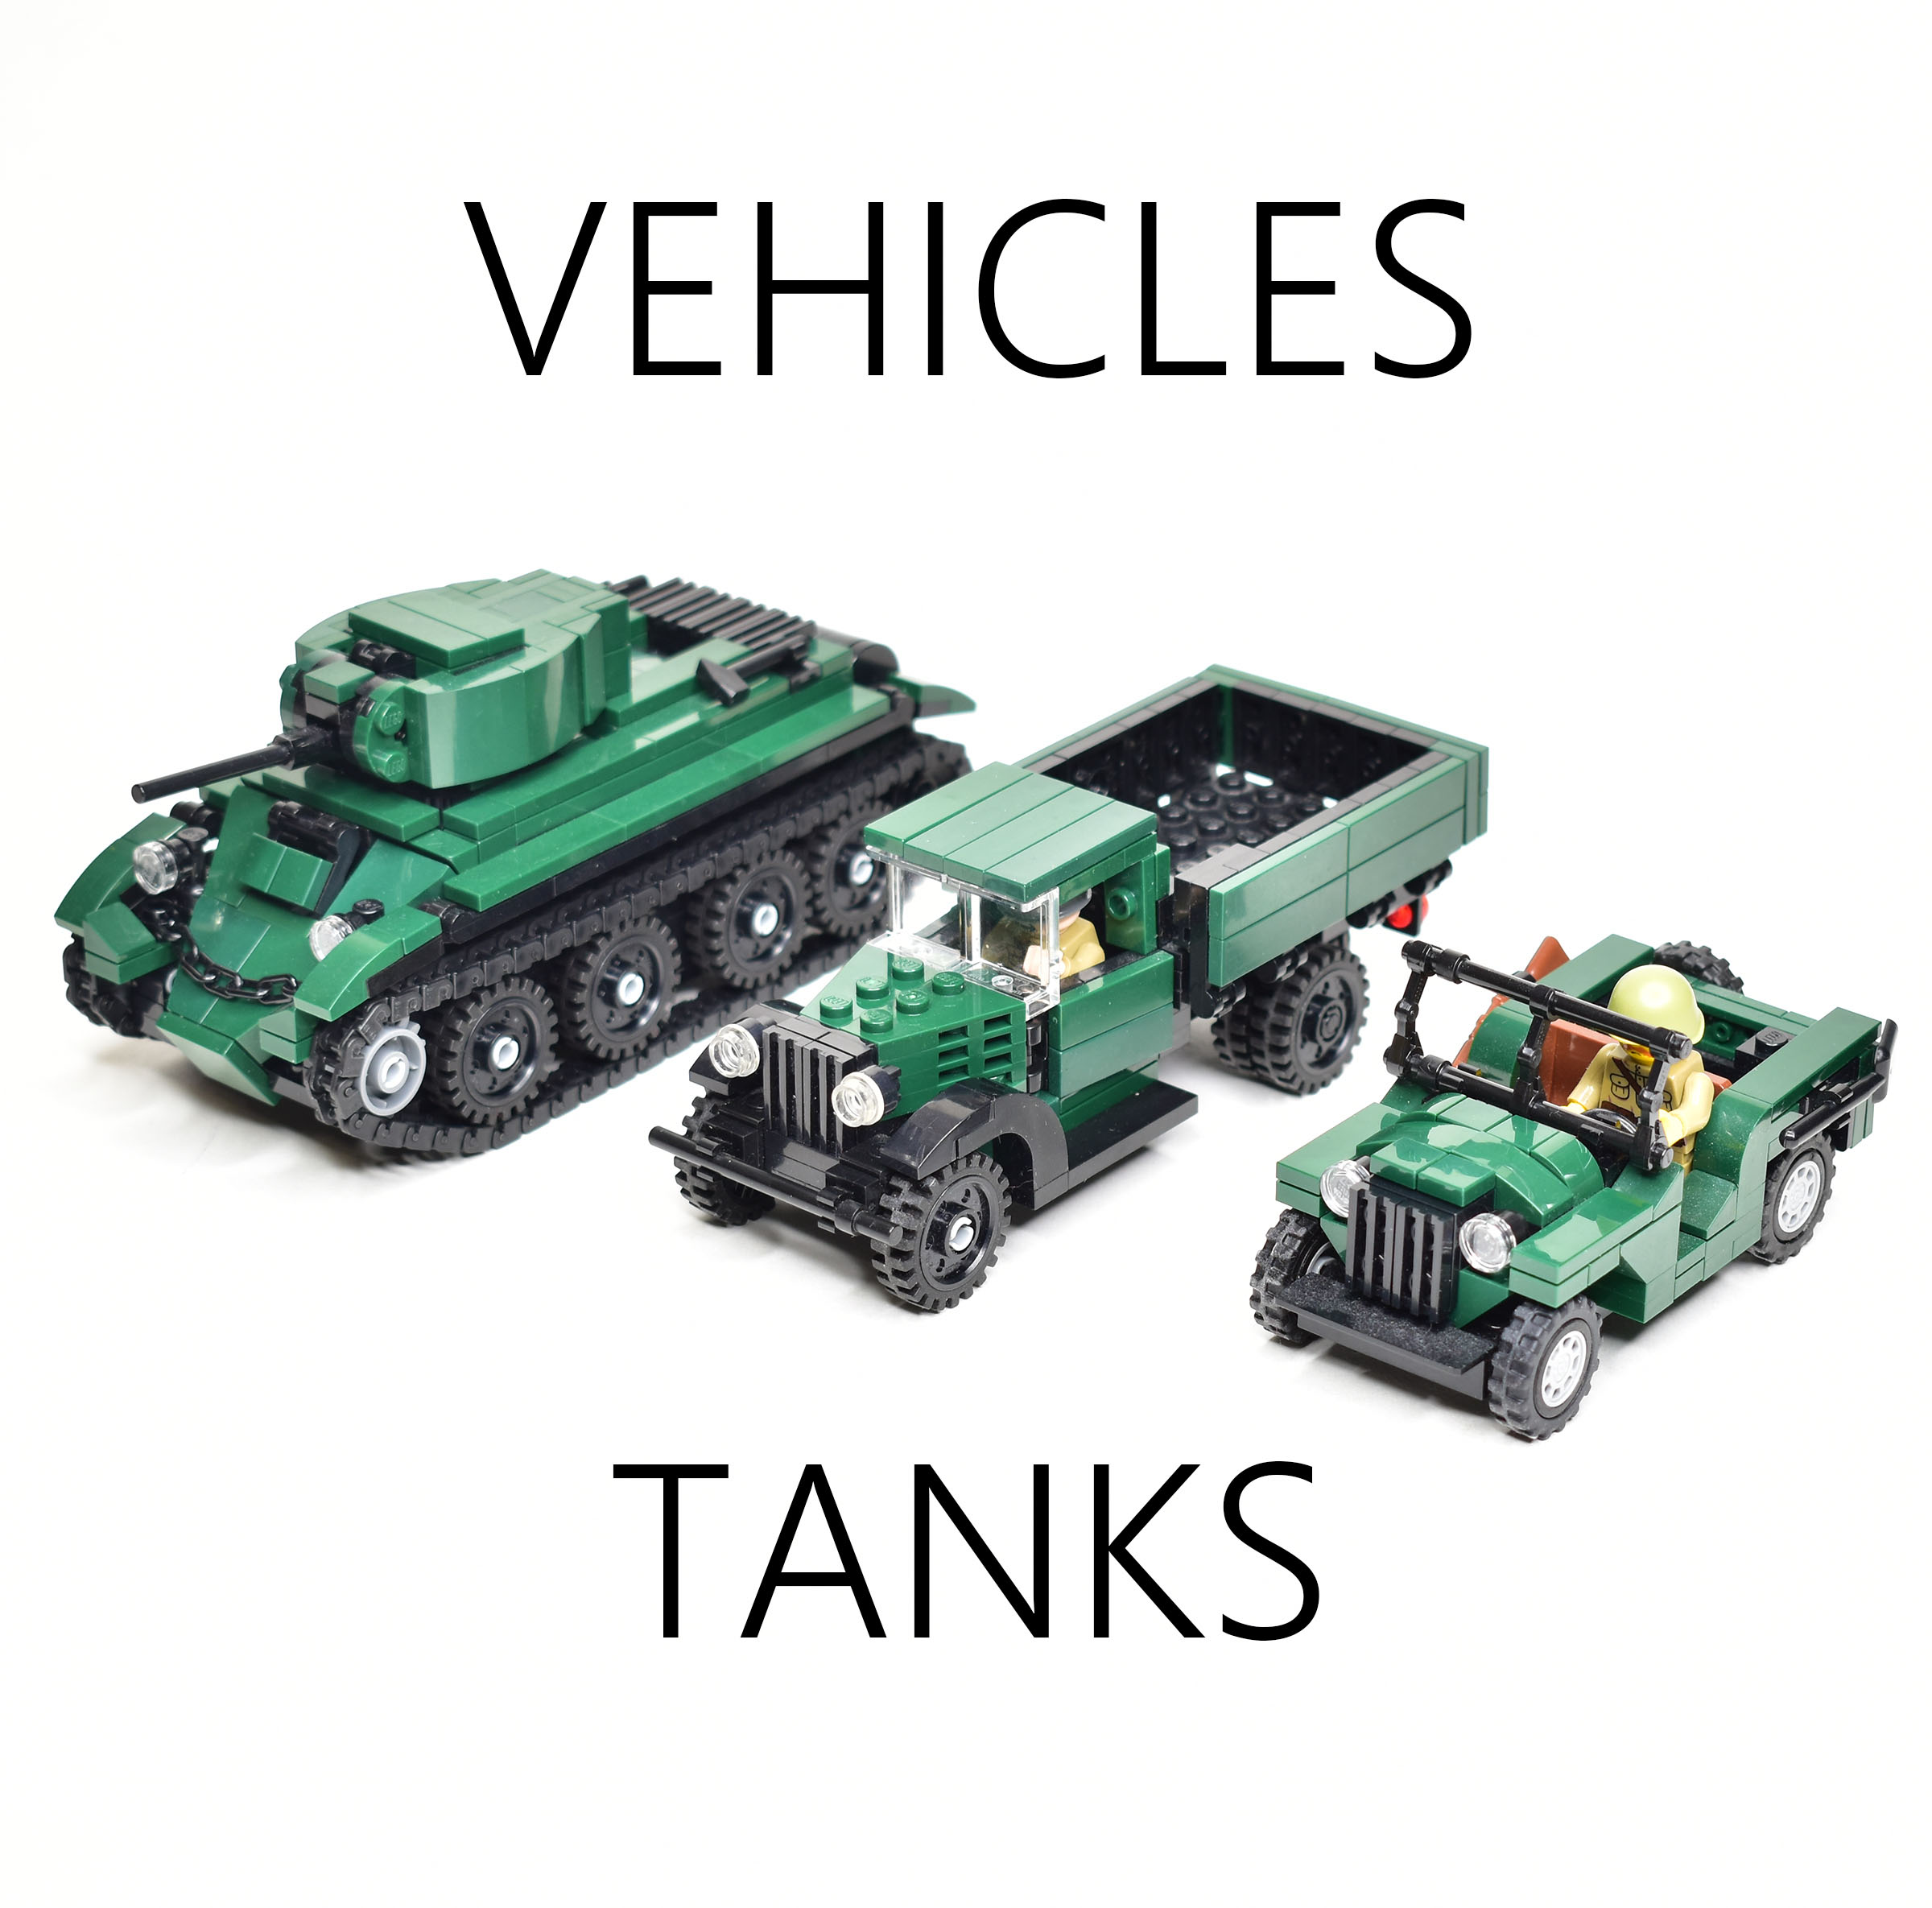 Vehicles and tanks